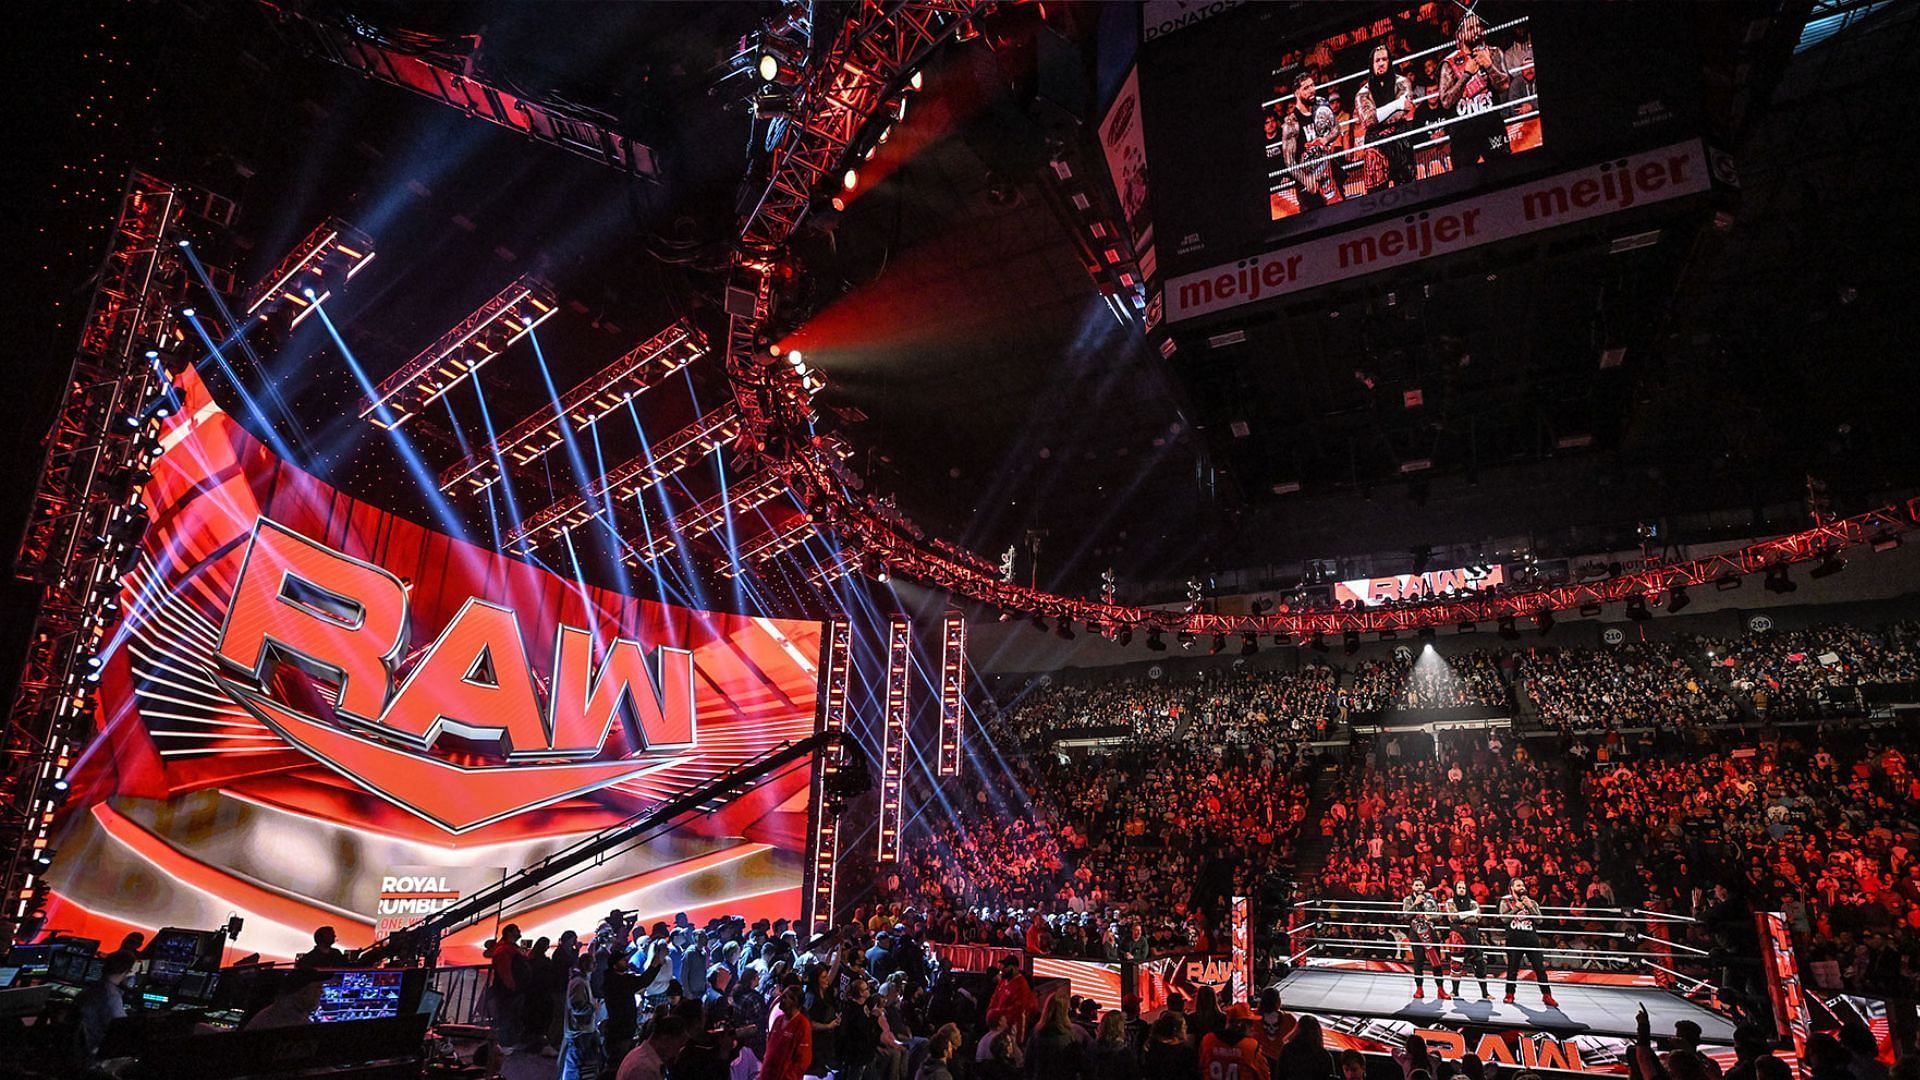 RAW aired live from the PNC Arena in North Carolina last night.